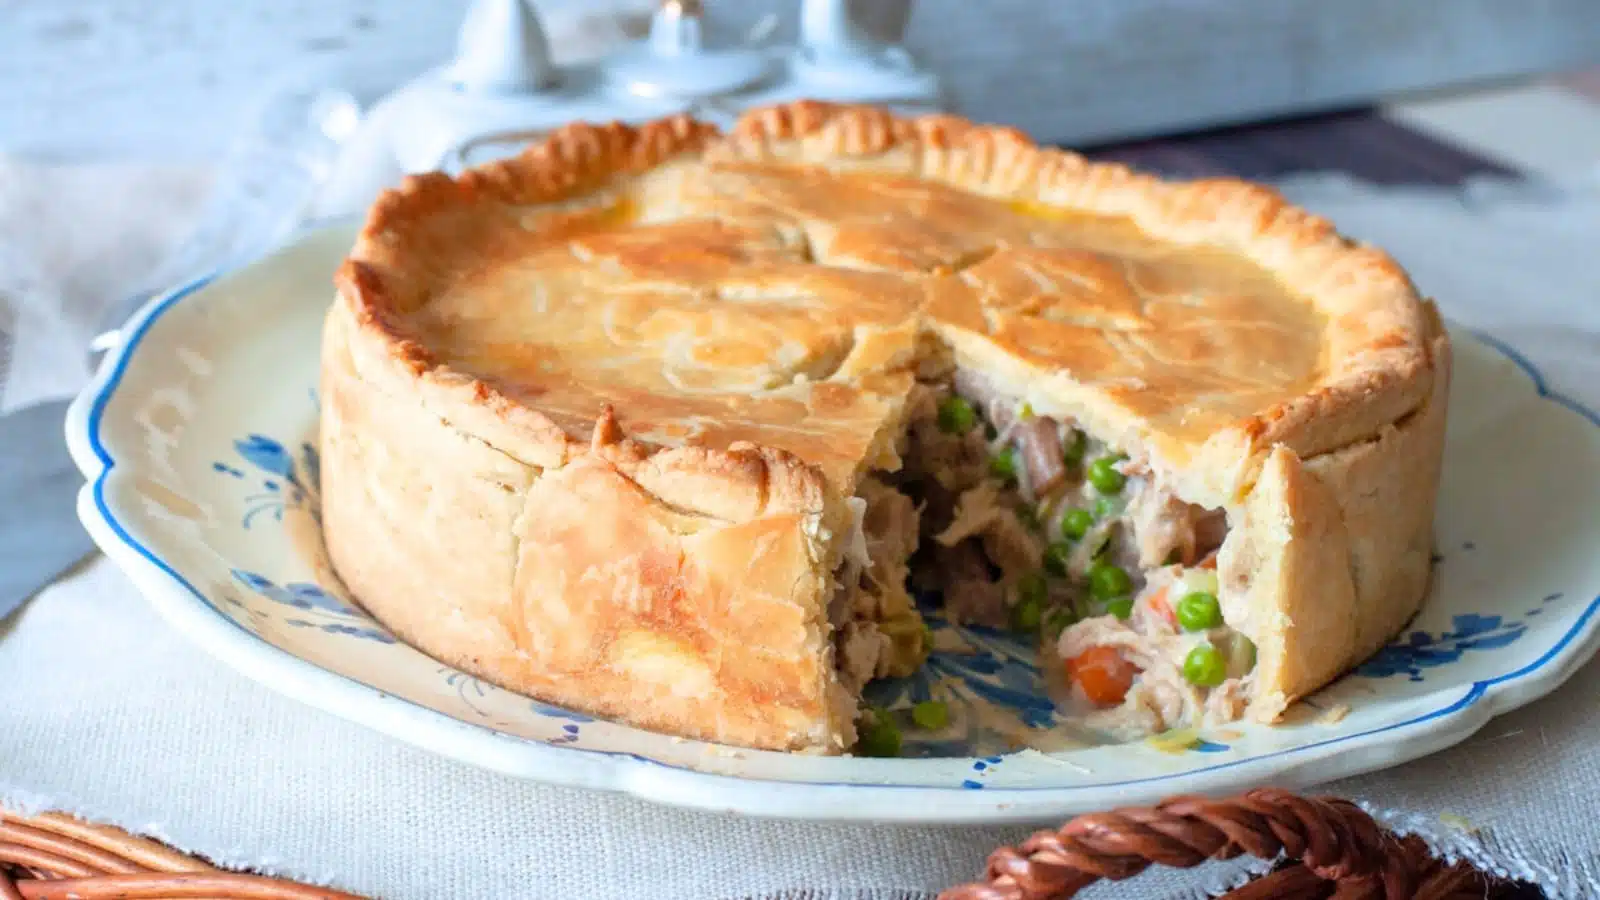 A plate with a double crusted chicken pot pie with mushrooms